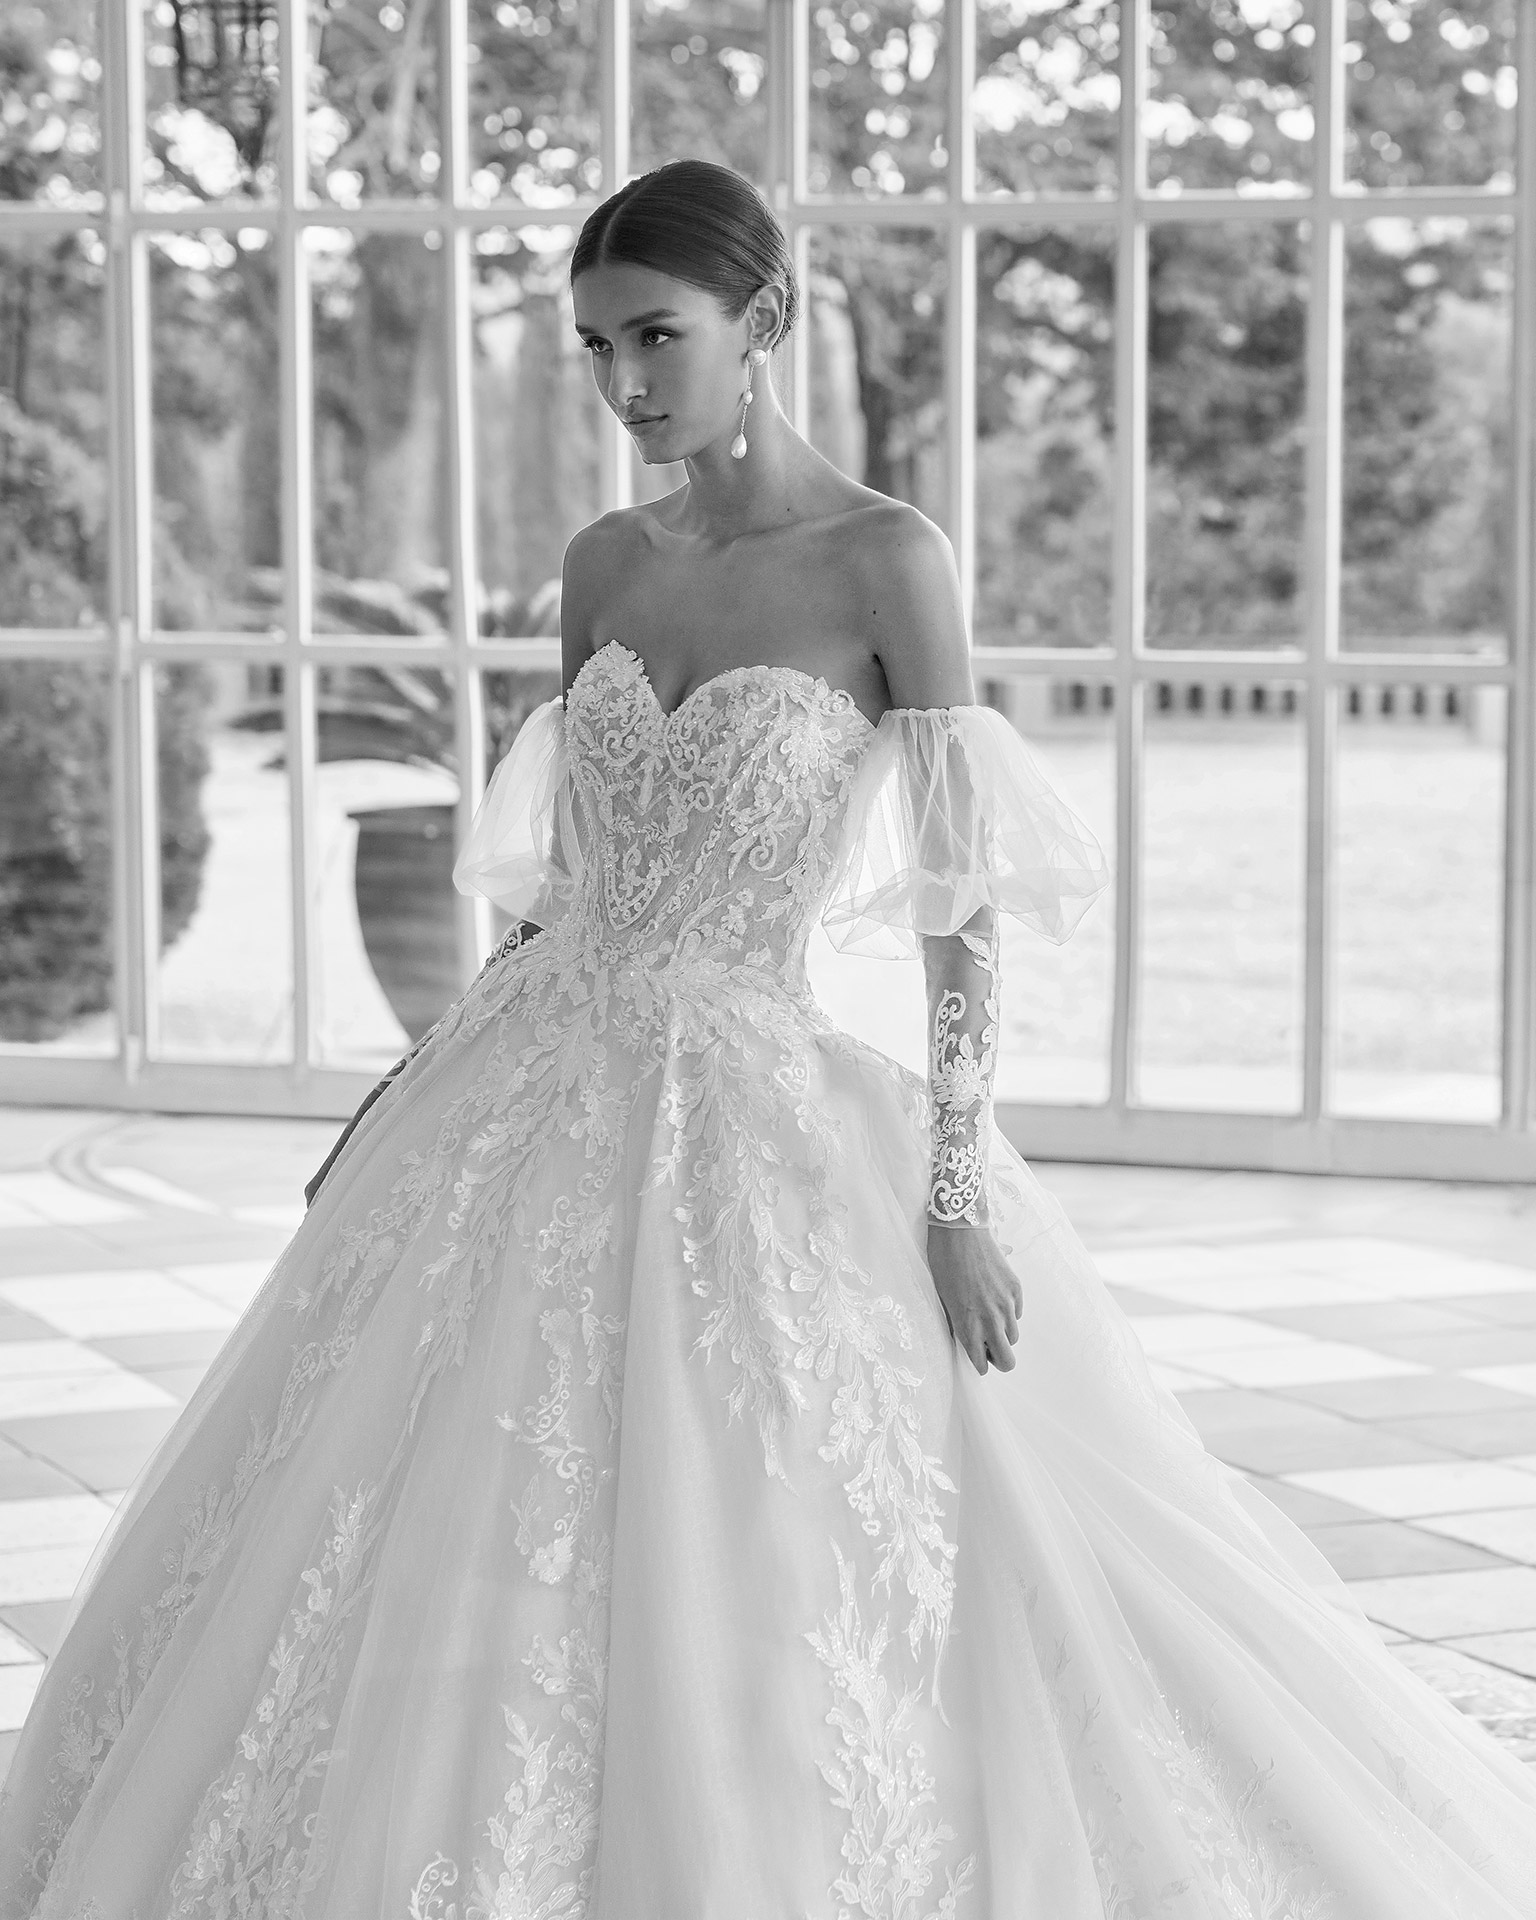 Romantic princess-style wedding dress, with a full sheath-style skirt; with a sweetheart neckline, a corset back, and long puffed tulle and lace sleeves. Delicate Luna Studio outfit made of tulle and lace, with beadwork finishes. LUNA_NOVIAS.